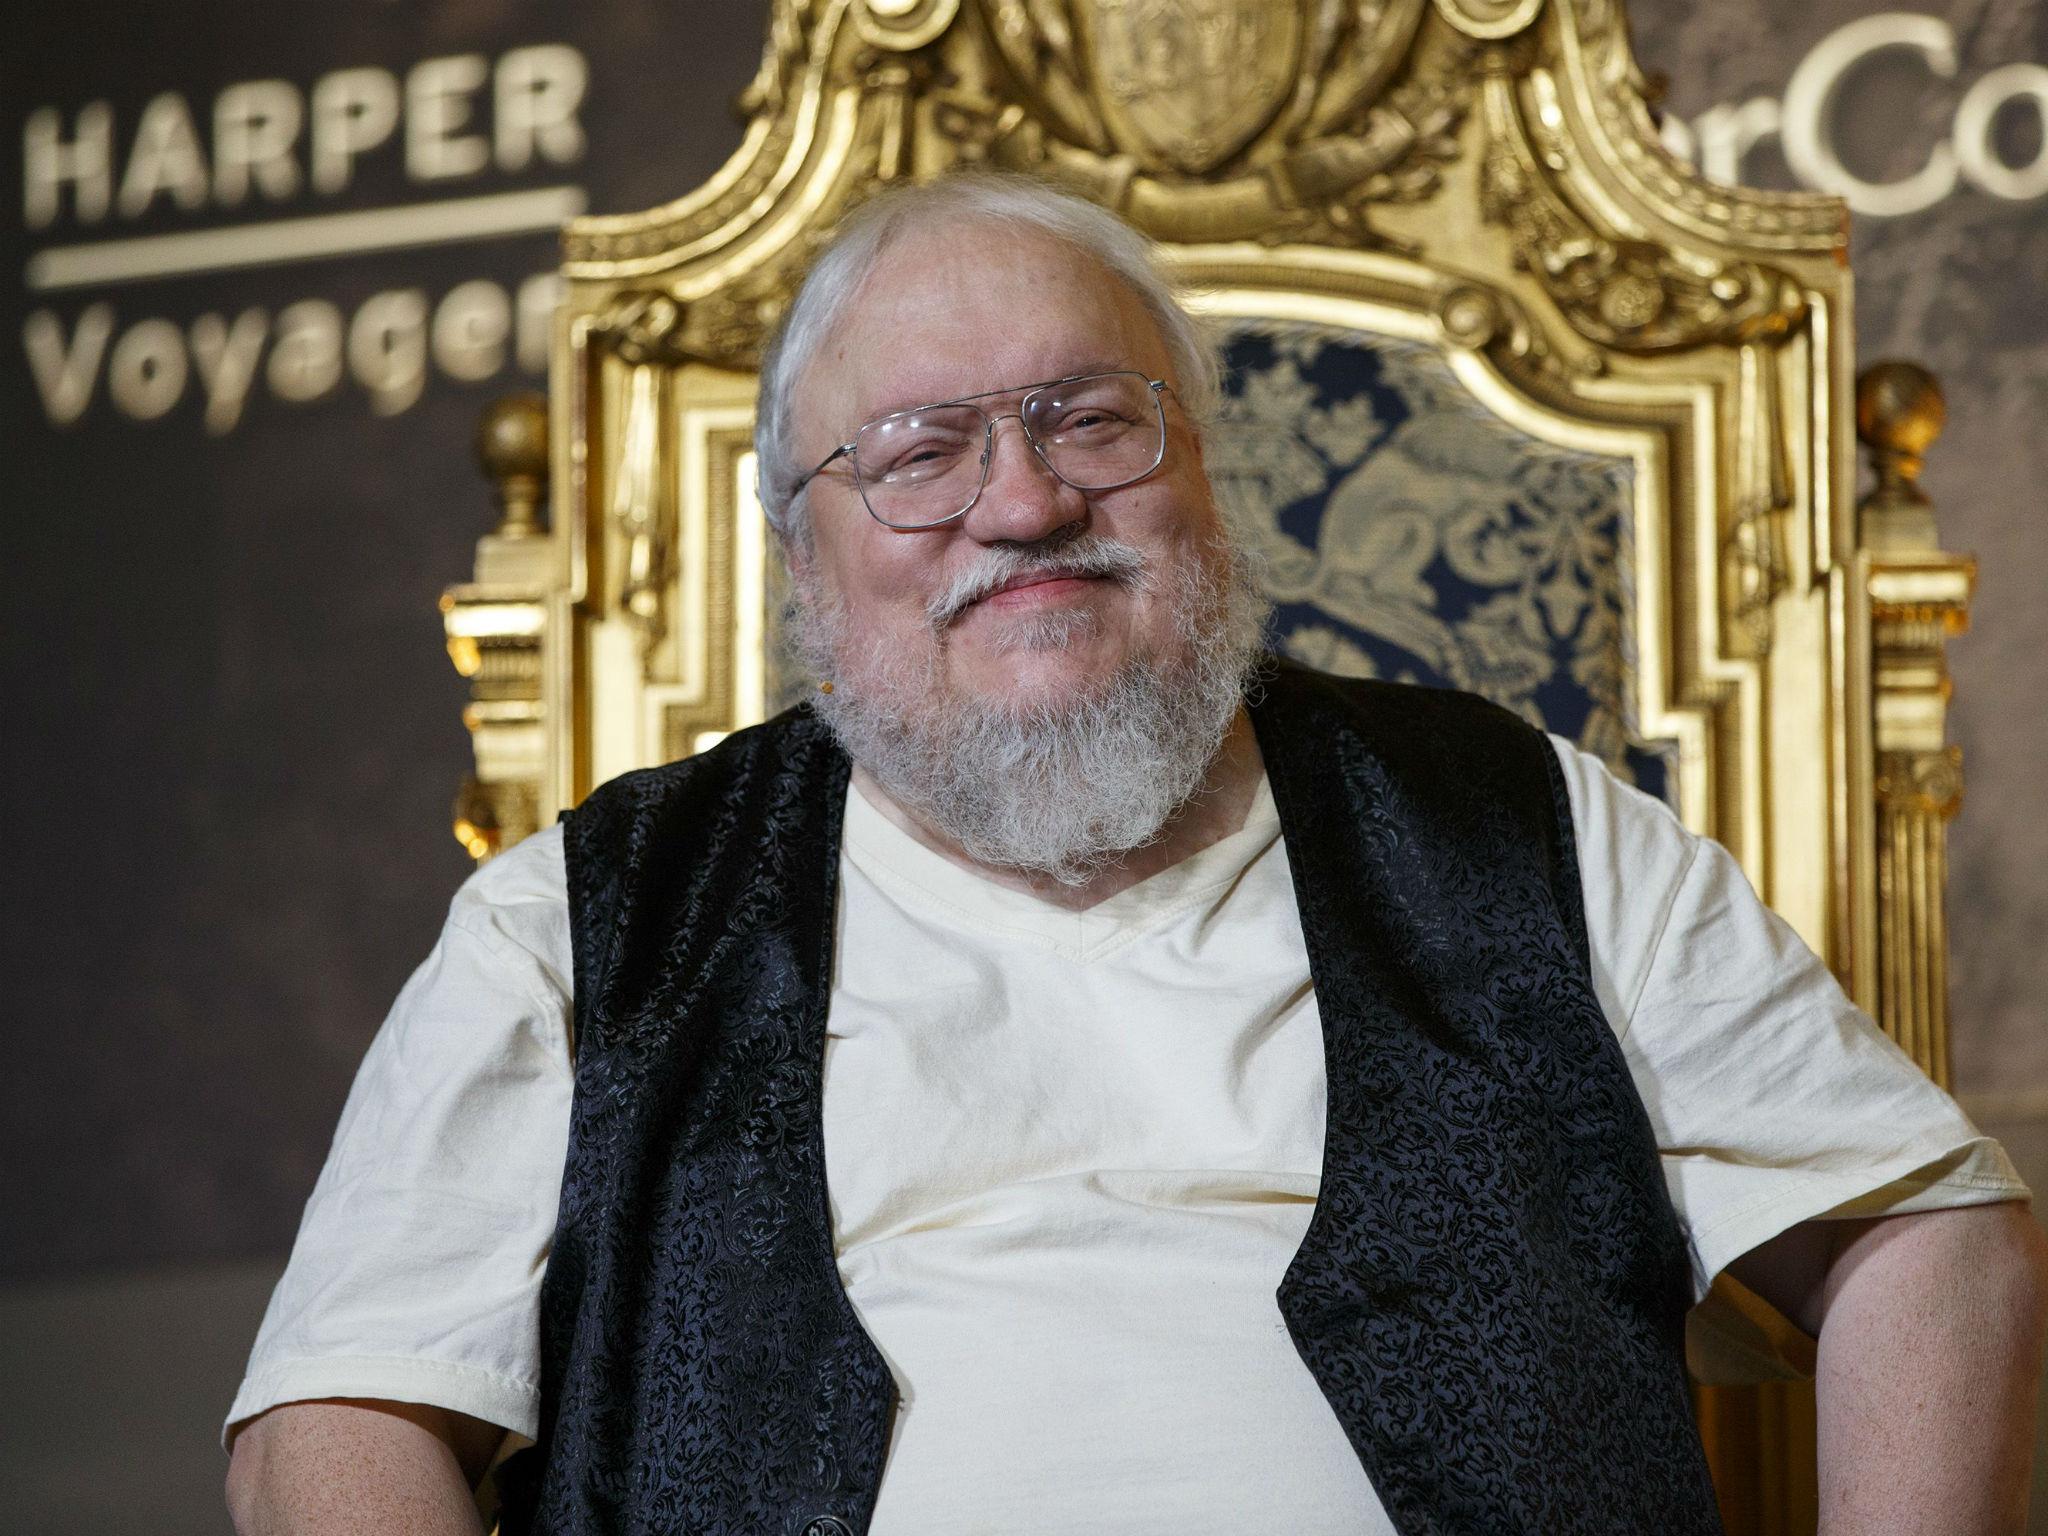 Game of Thrones author George RR Martin has written a series of WEsteros-set novellas